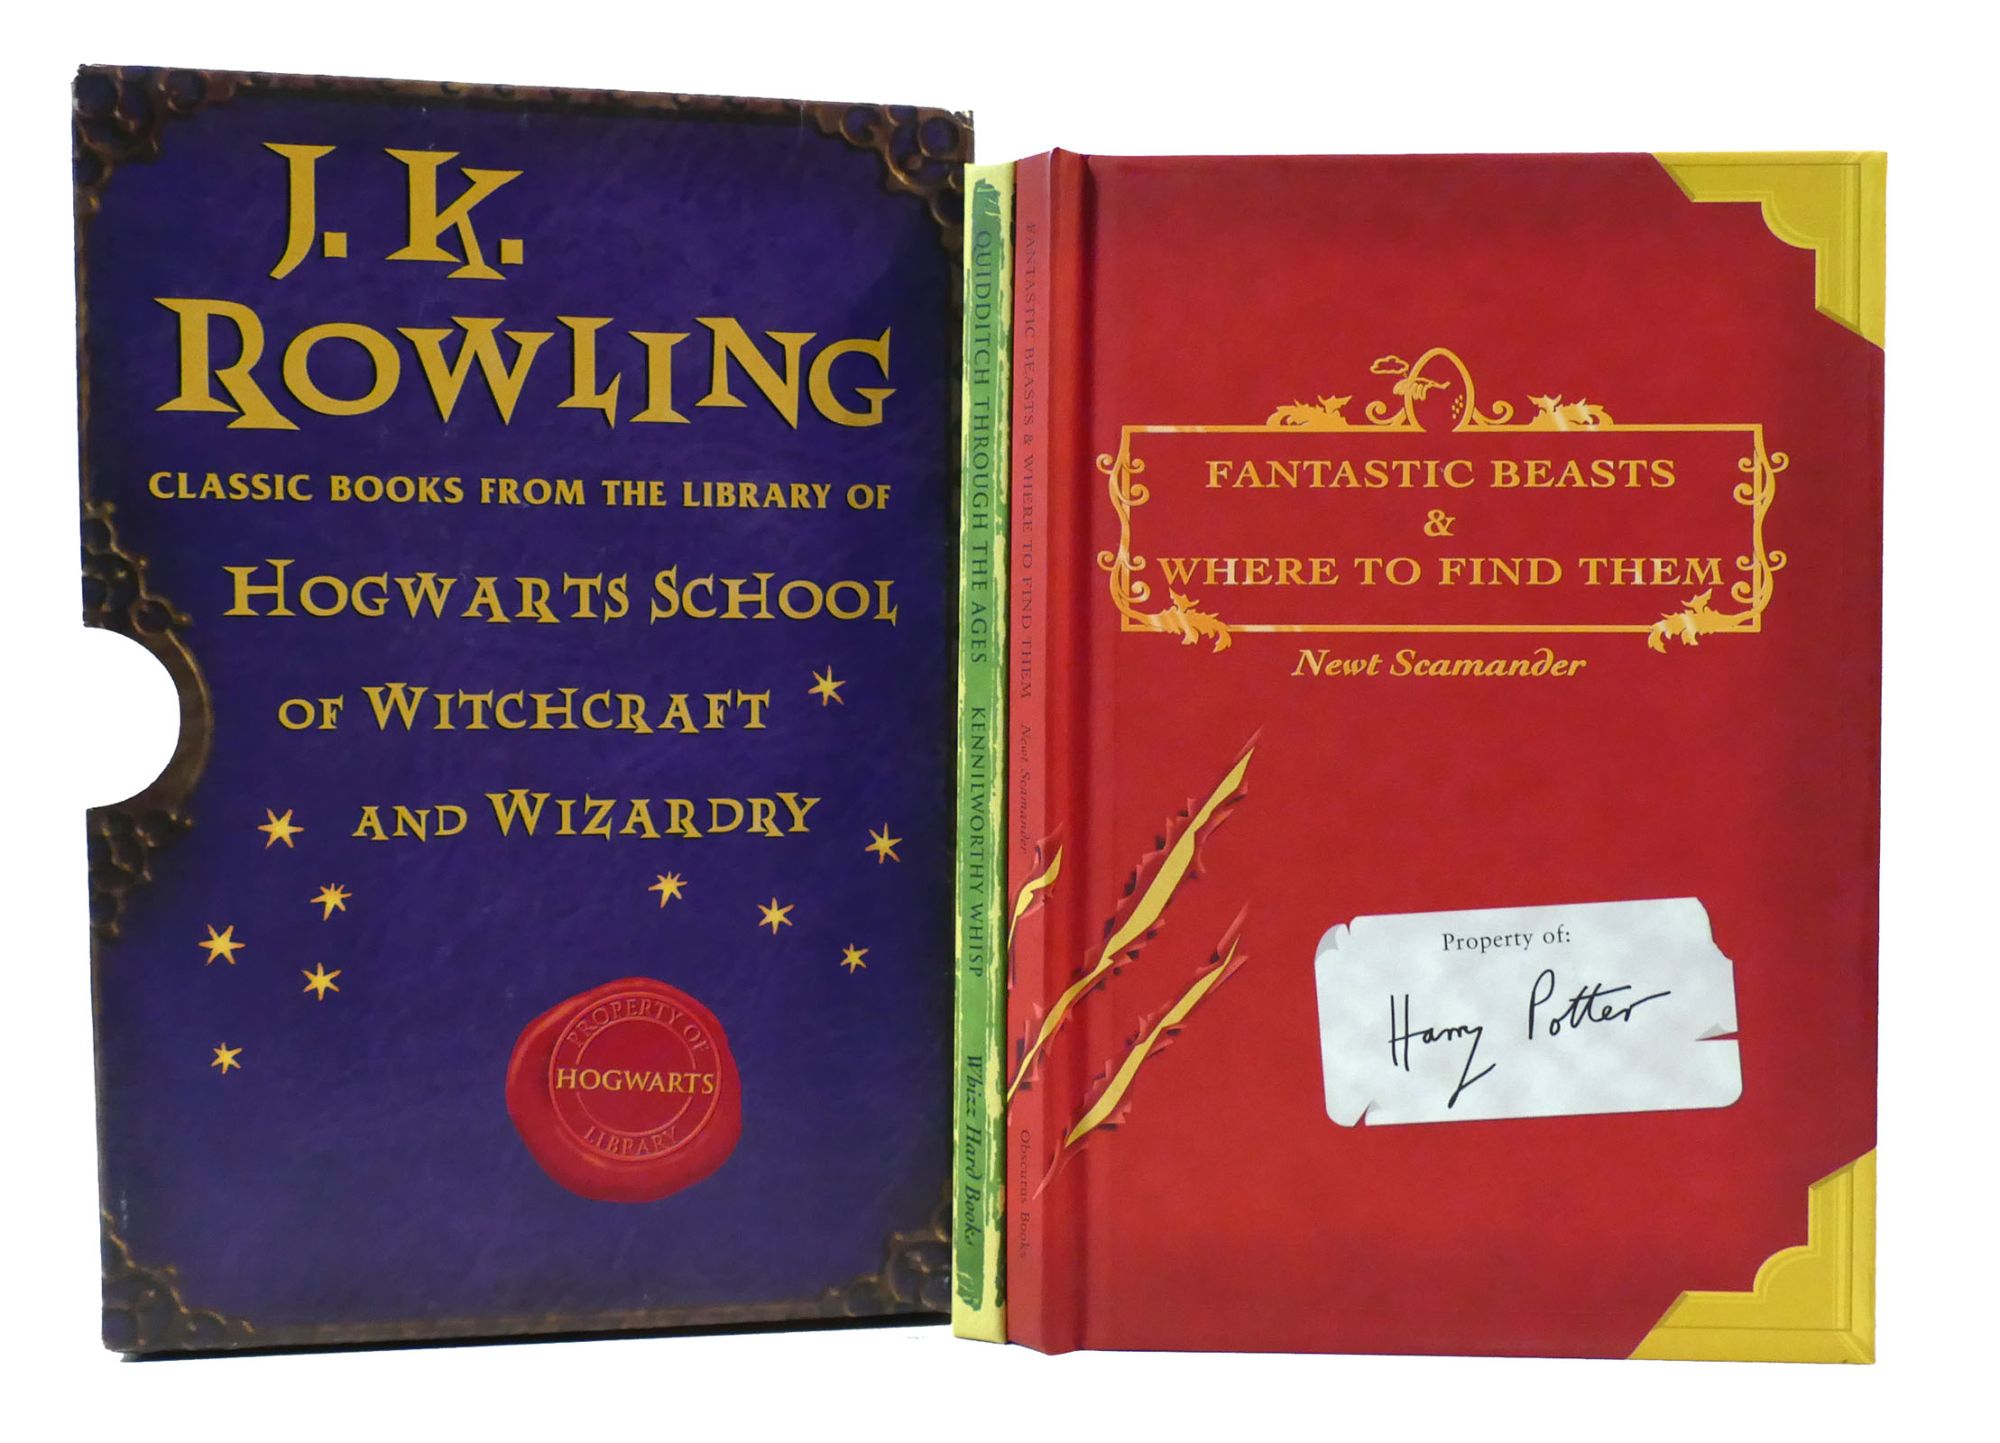 J.K. Rowling Collection 3 Books Set (Fantastic Beasts and Where to Find  Them, The Crimes of Grindelwald, Harry Potter and the Cursed Child - Parts  One and Two) : J.K. Rowling, Fantastic